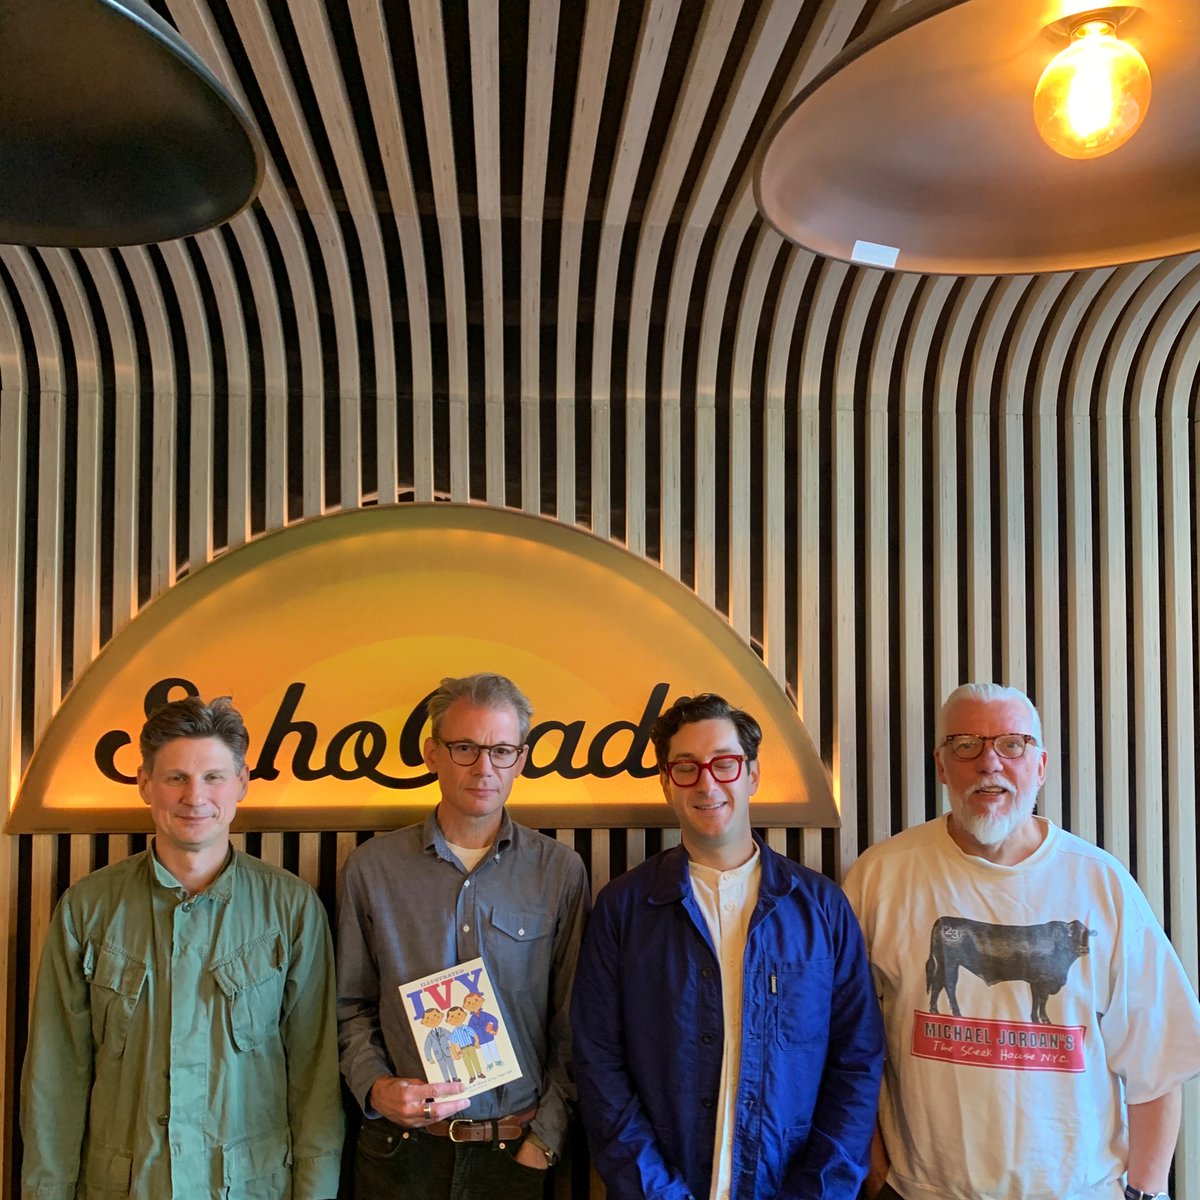 Forthcoming coming @sohoradio . No @gregboraman this time, but there’s Marcus alongside Ben with his Illustrated Ivy book via @herb_lester and Giacomo of @KansasSmittys fame. Mention, among others, in dispatches for @docnrollfest @BlackEyewear @EzraCollective